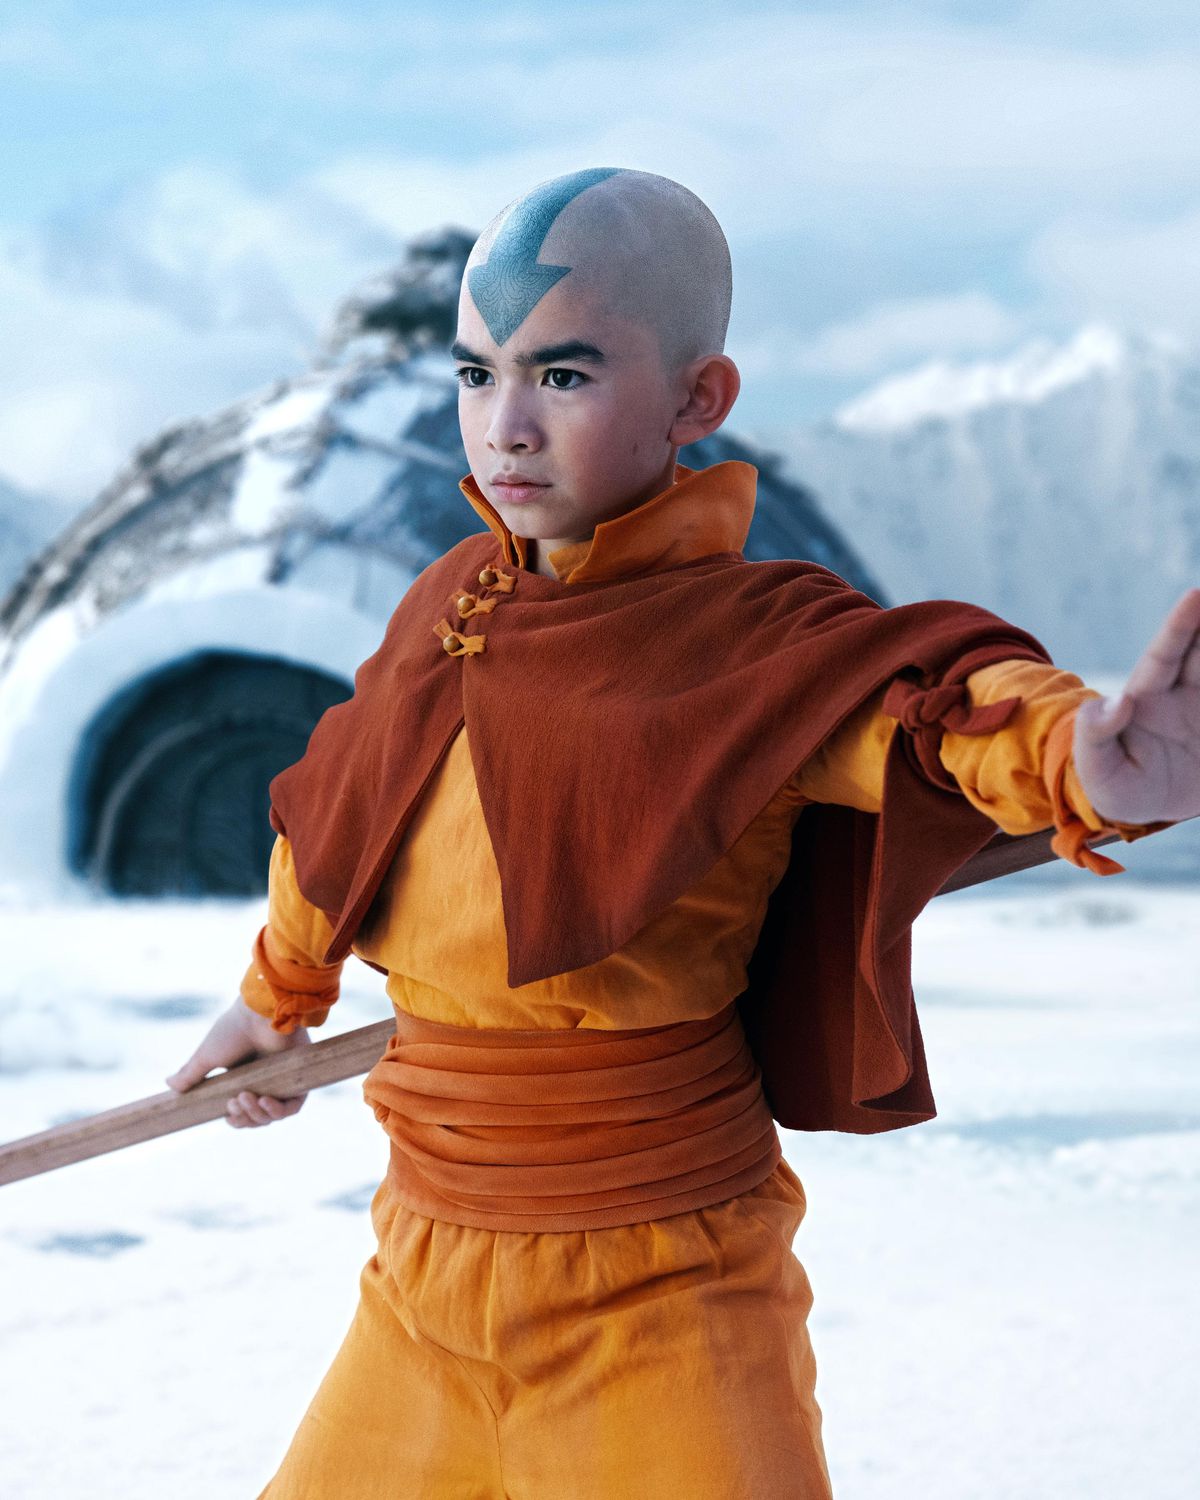 abby heskett recommends avatar the last airbender photos pic